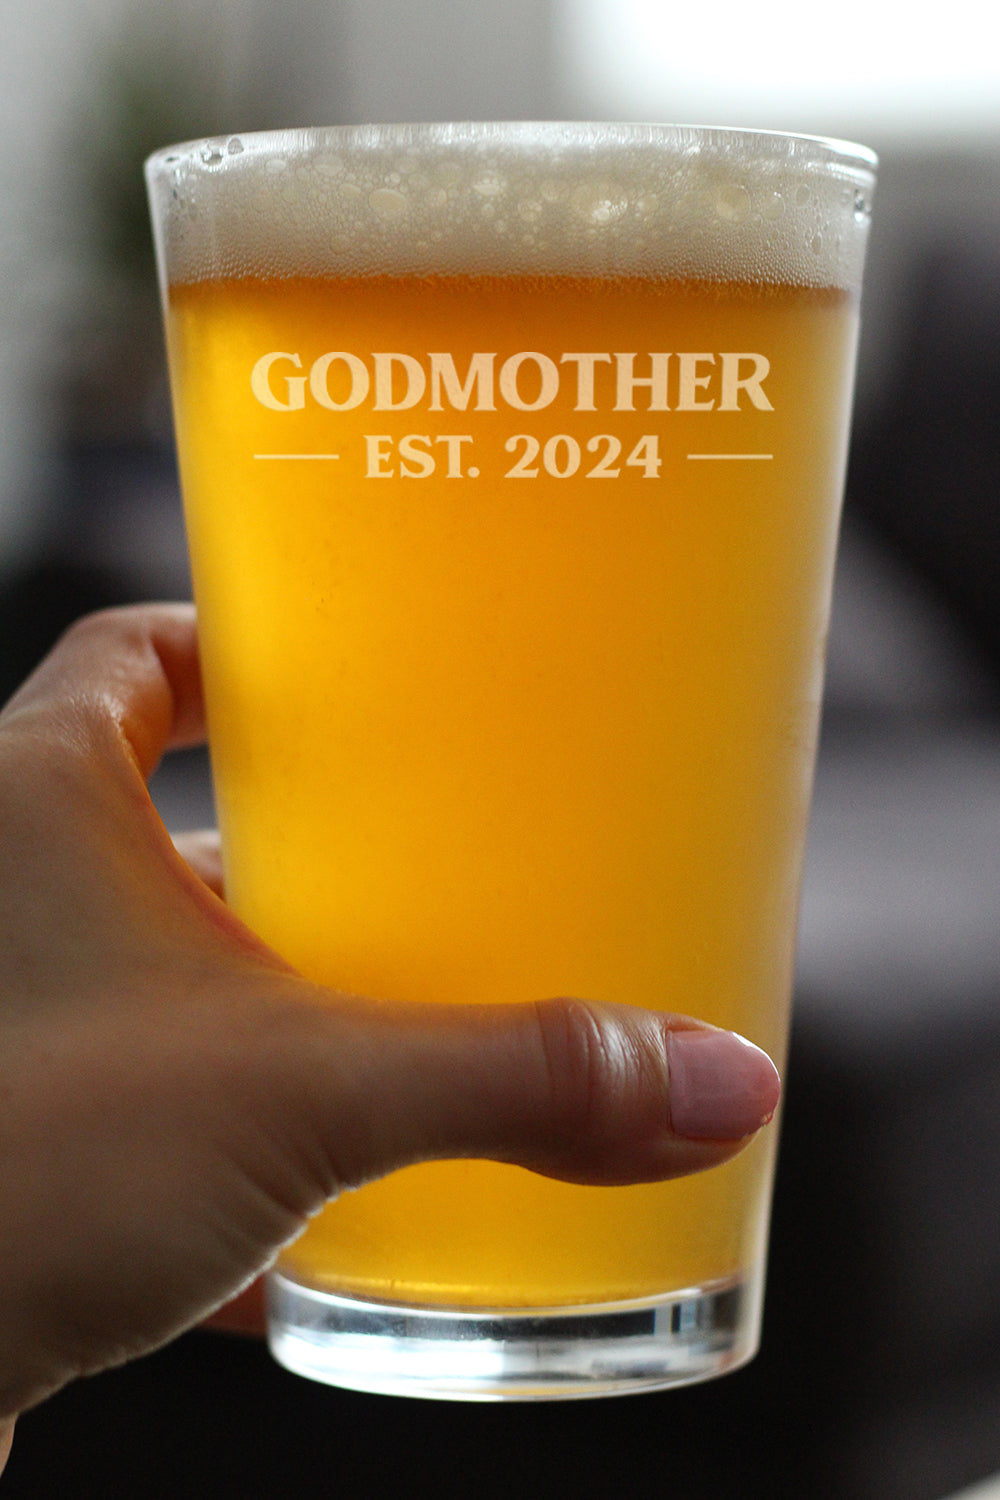 Godmother Est 2024 - New Godmother Pint Glass Proposal Gift for First Time Godparents - Bold 16 Oz Glasses